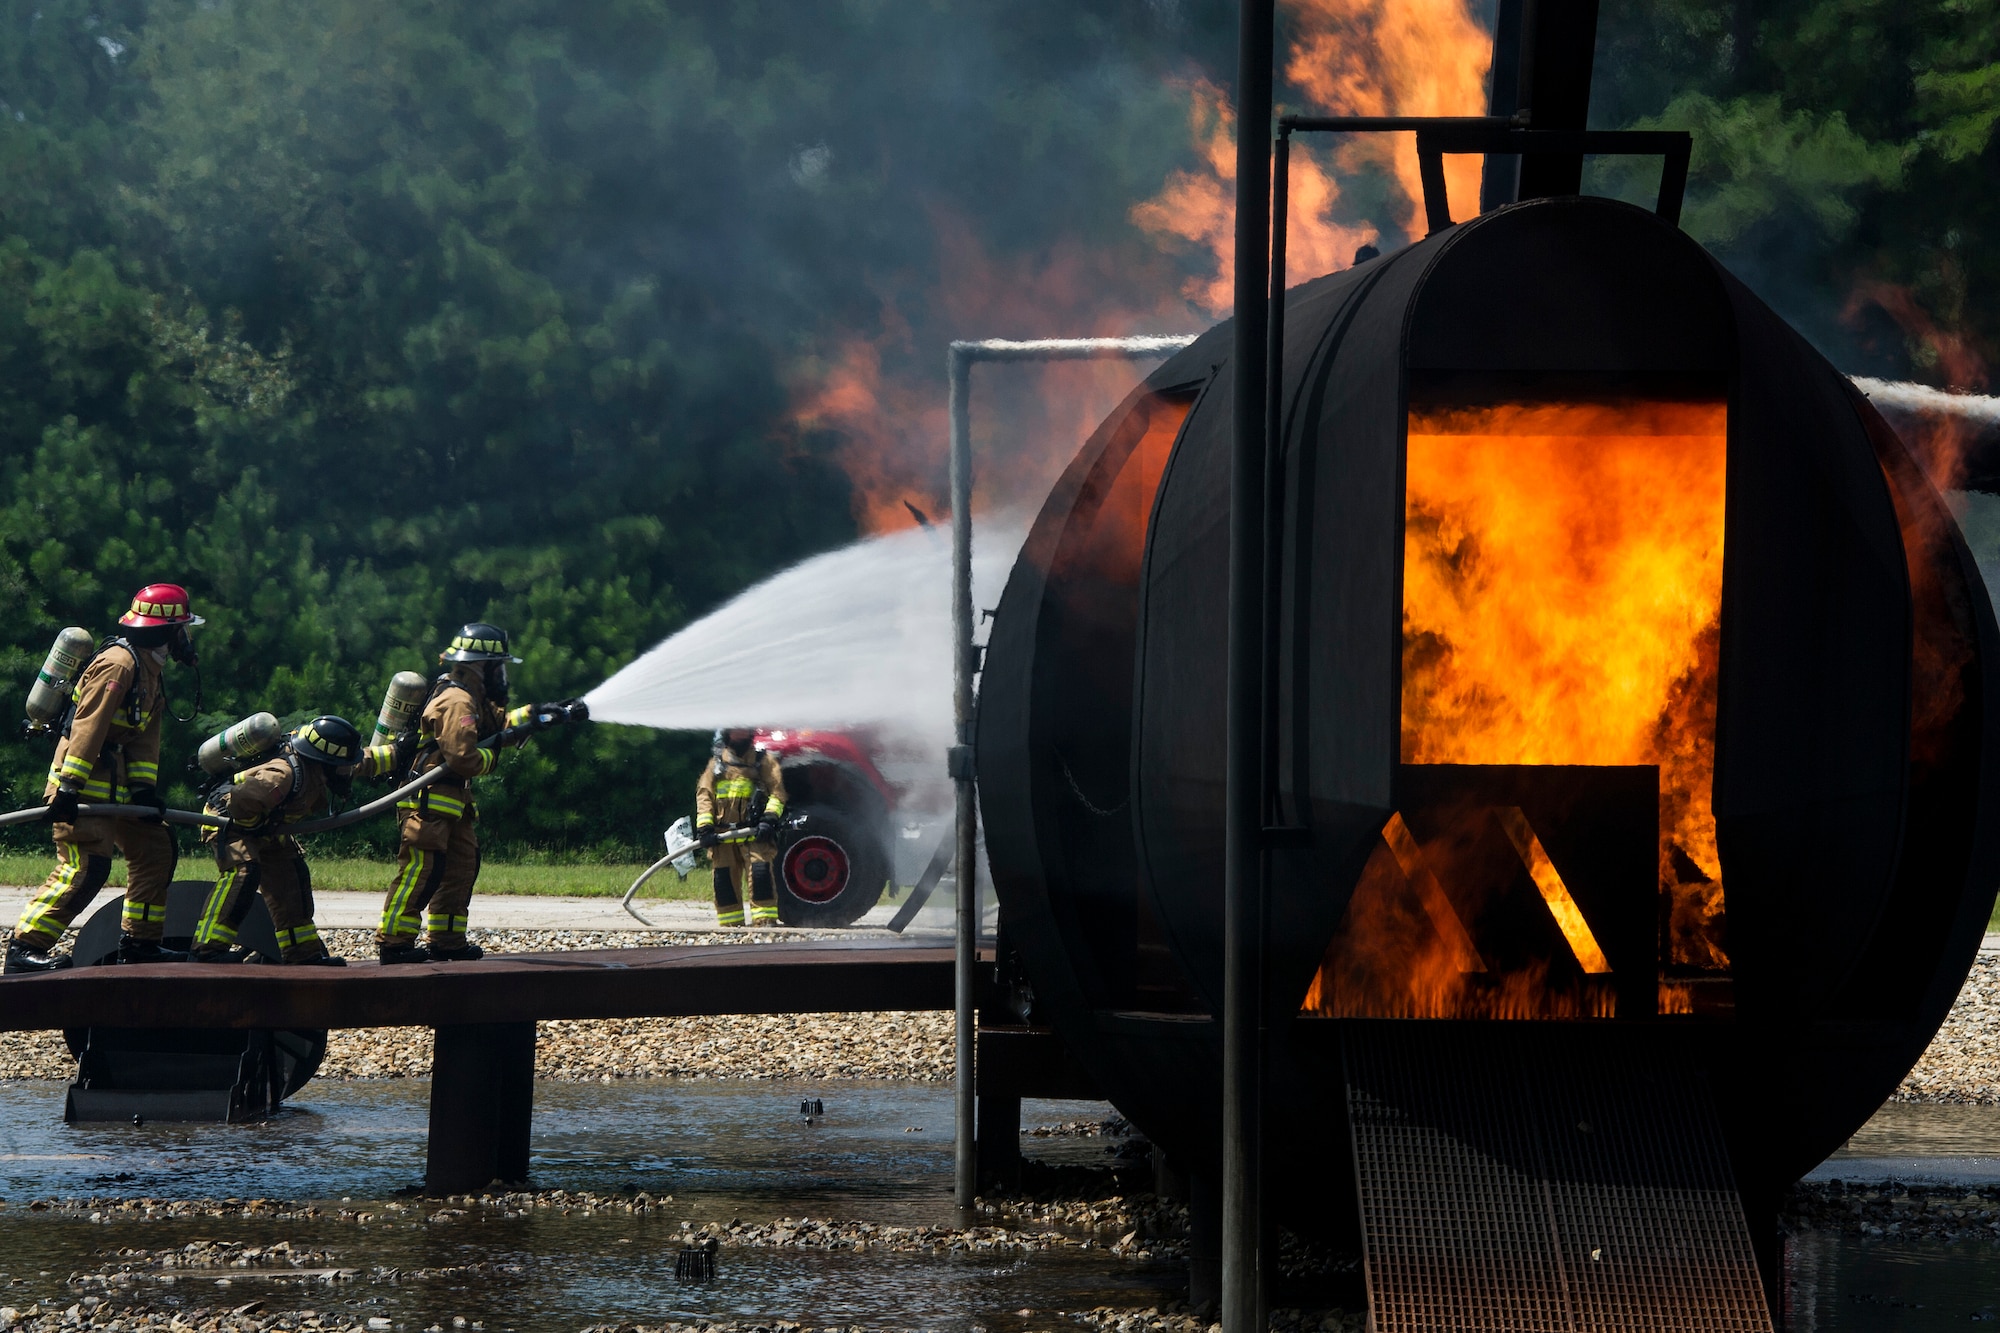 A team of Reserve Citizen firefighters respond to a simulated aircraft fire during Patriot Warrior at Dobbins Air Reserve Base, Georgia, Aug. 15, 2018. Reserve Citizen Airmen with the 446th Civil Engineer Squadron from Joint Base Lewis-McChord, Washington, 514th CES, Joint Base McGuire-Dix-Lakehurst, New Jersey and 624th CES, Joint Base Pearl Harbor-Hickam, Hawaii, trained together as one team. The Patriot Warrior exercise supports the Air Force Reserve guiding and foundational principles of preserving, building and shaping a combat ready, cost effective, experienced and sustainable professional military force. (U.S. Air Force photo by Master Sgt. Theanne Herrmann)